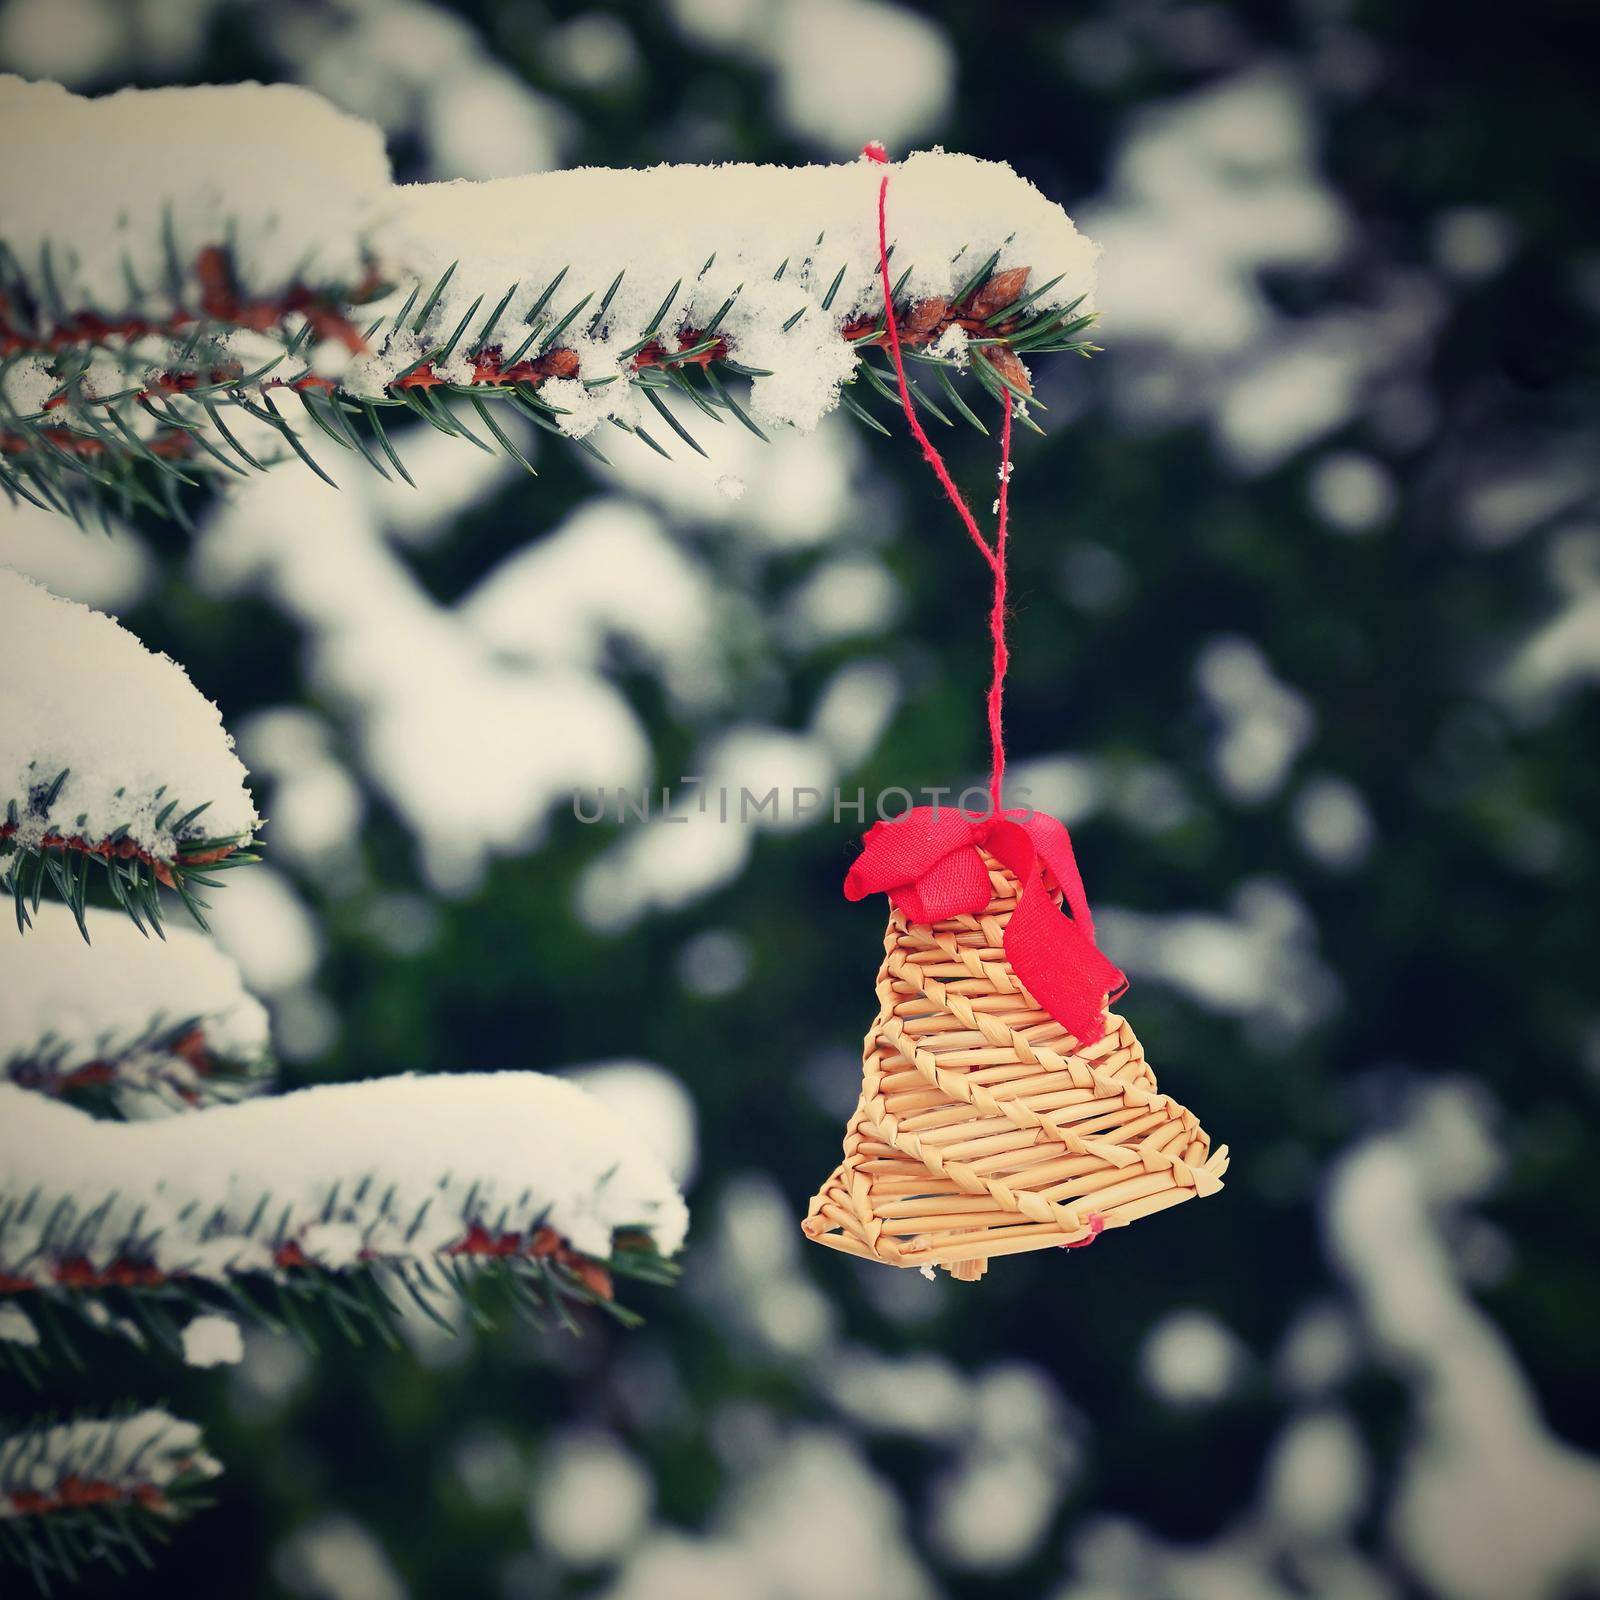 Beautiful natural Christmas decorations made of straw on a snowy Christmas tree. Winter nature colorful outdoor background for the holidays. by Montypeter